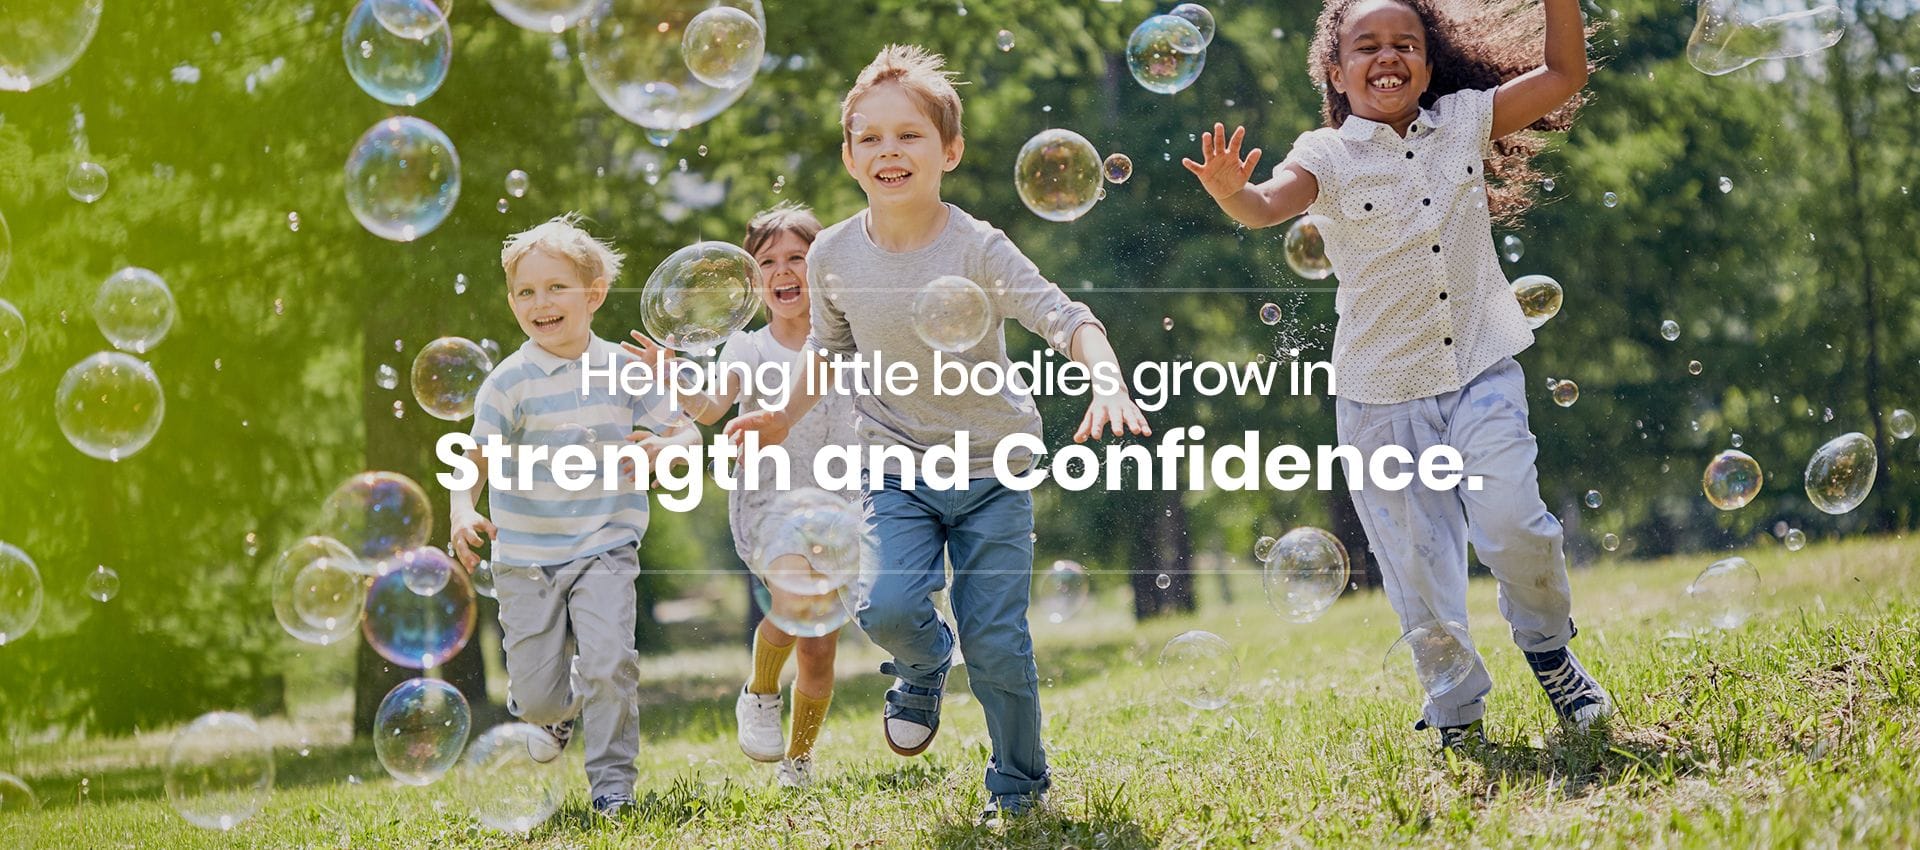 Helping little bodies grow in strength and confidence | Step by Step Physiotherapy for Children